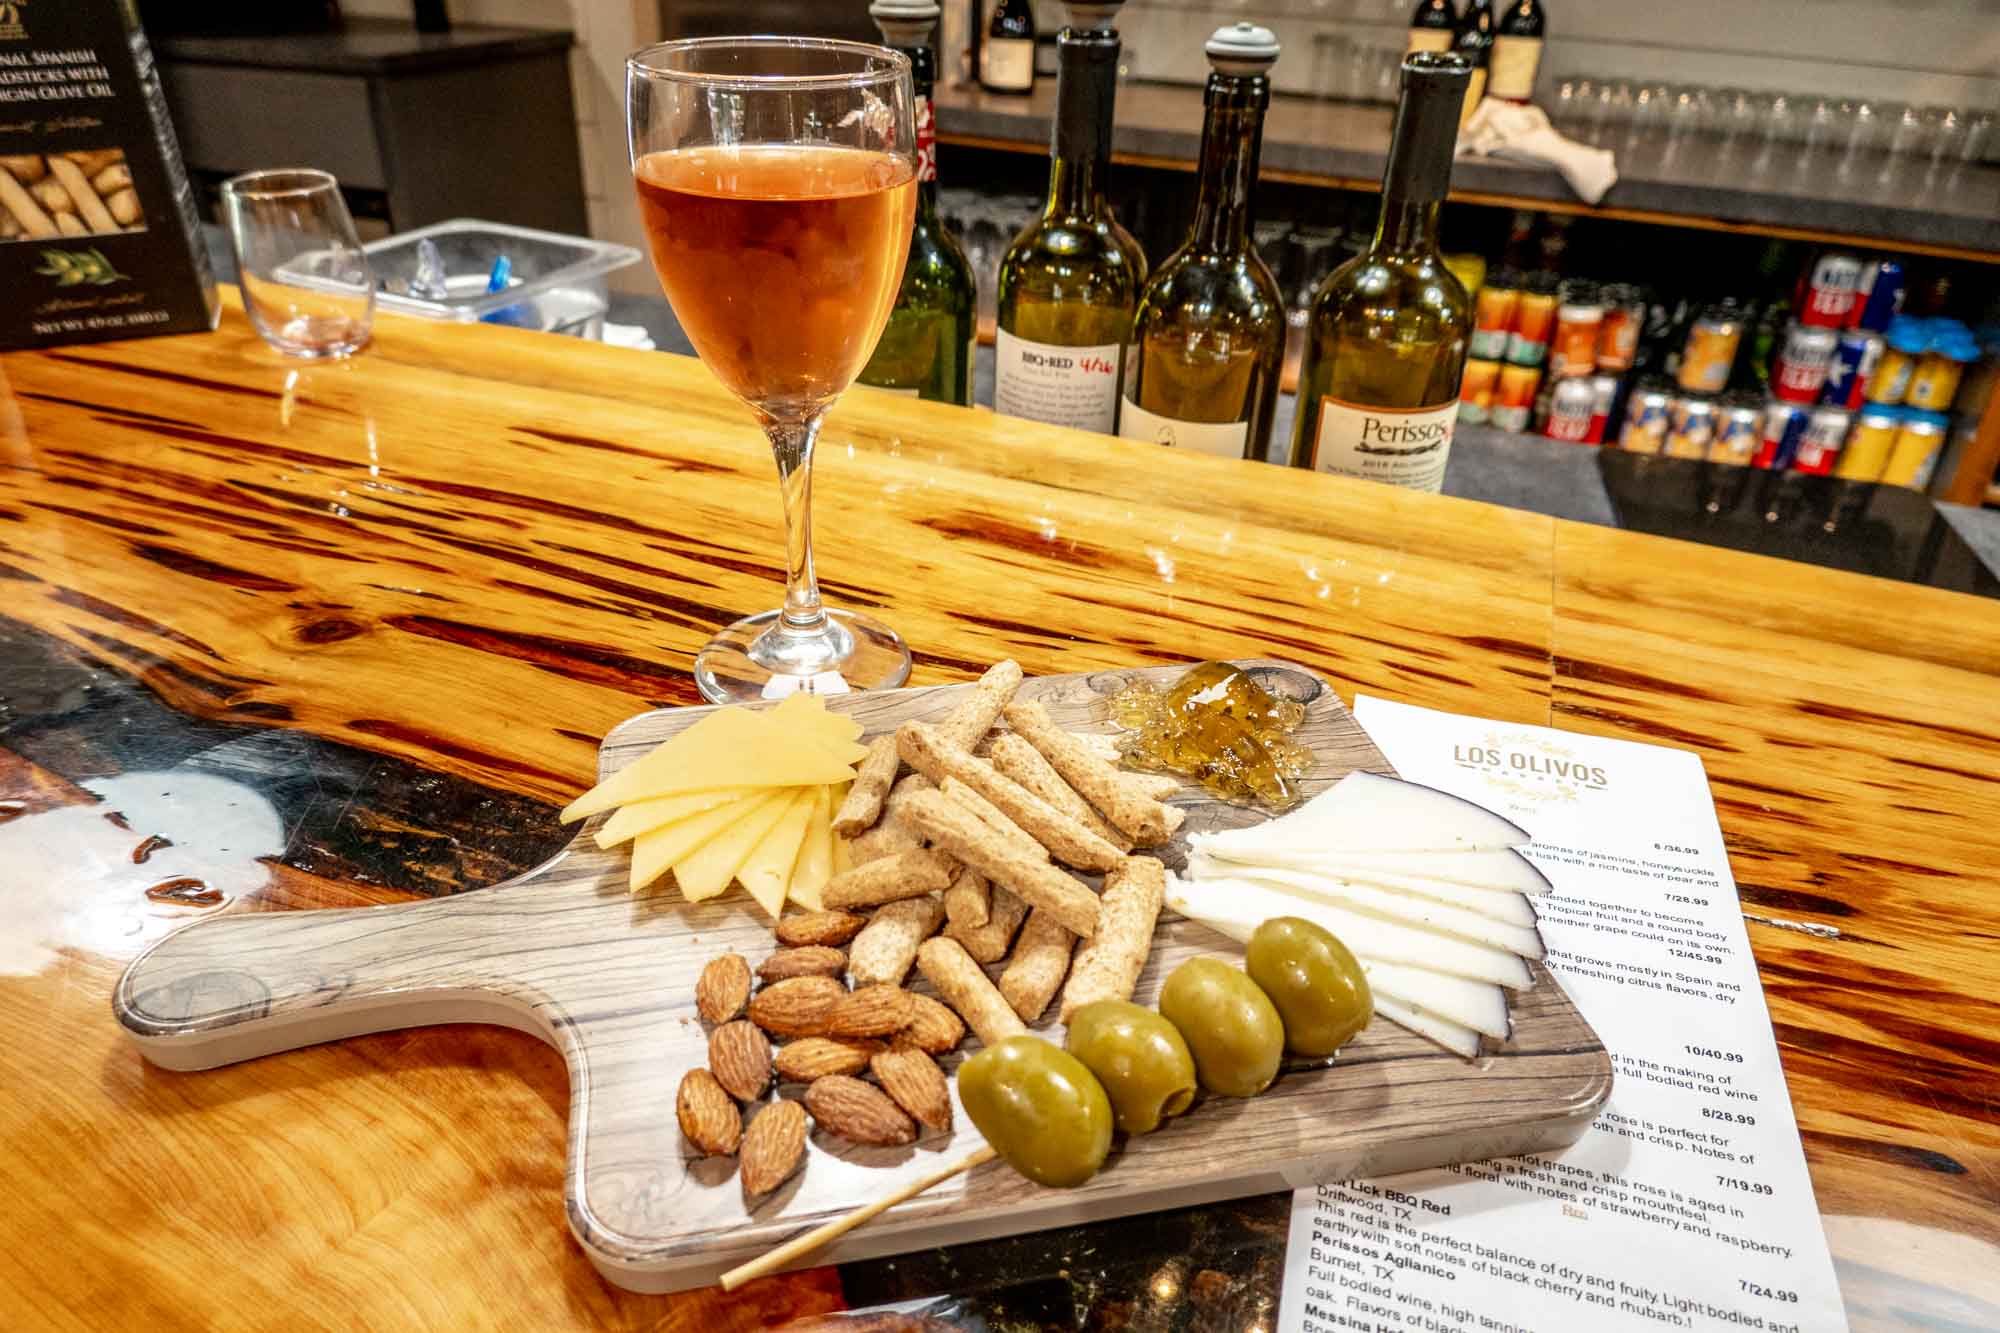 Cheese platter on a wooden board beside a glass of wine.